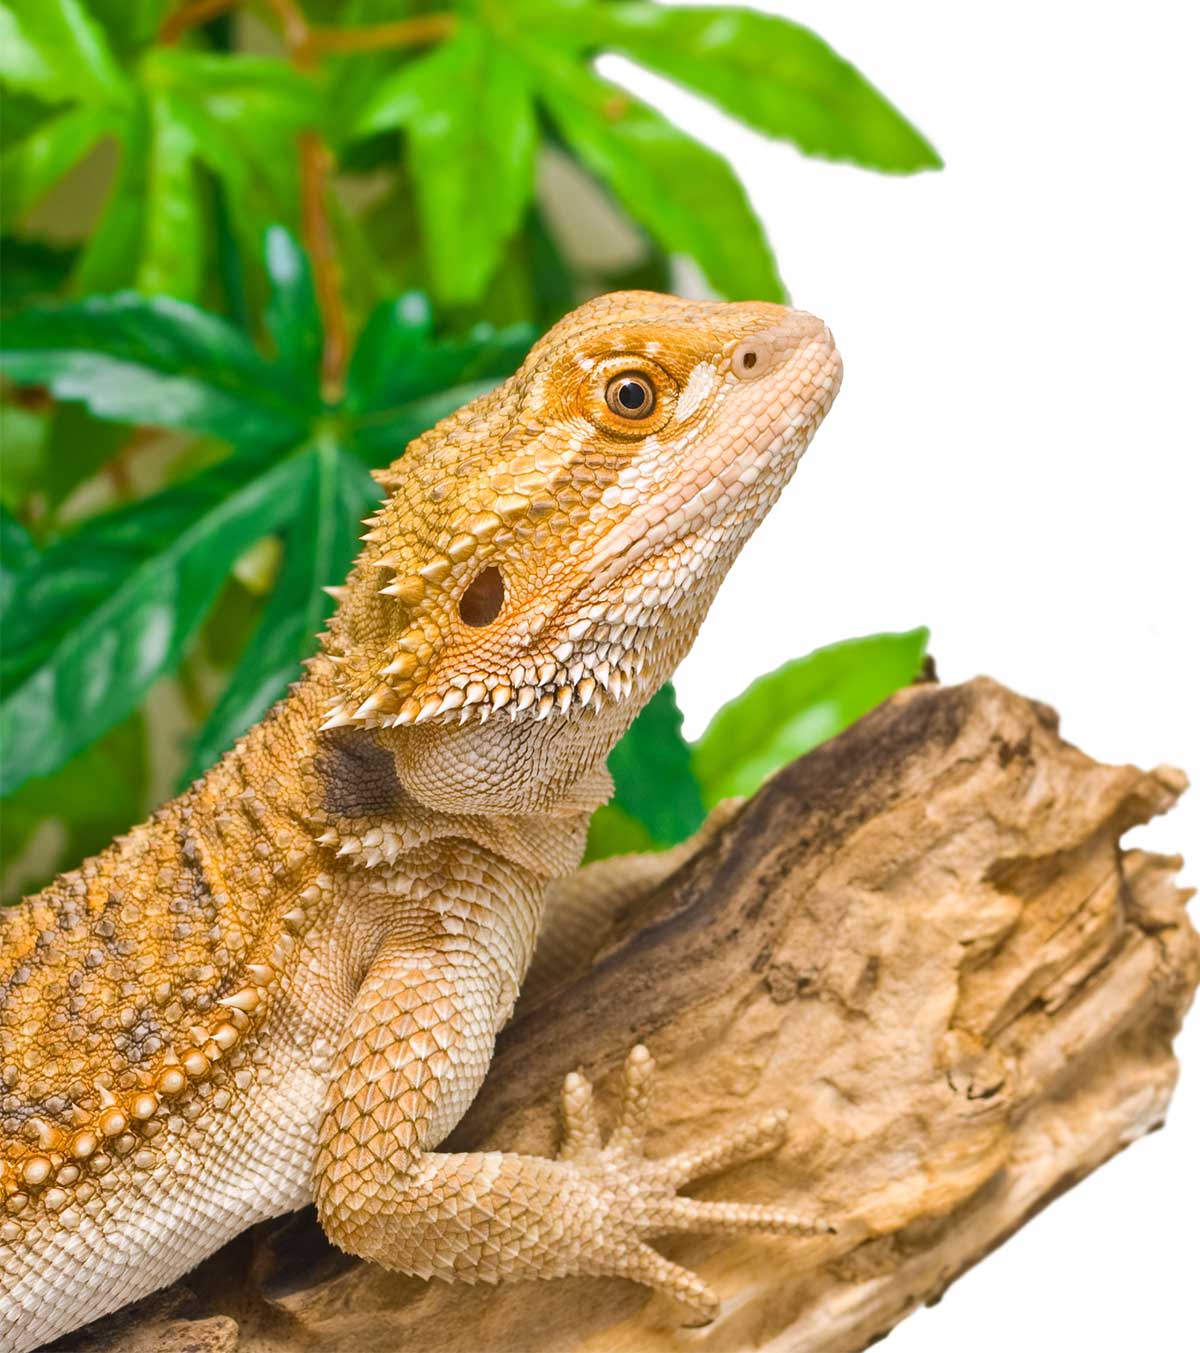 Bearded dragon care guide